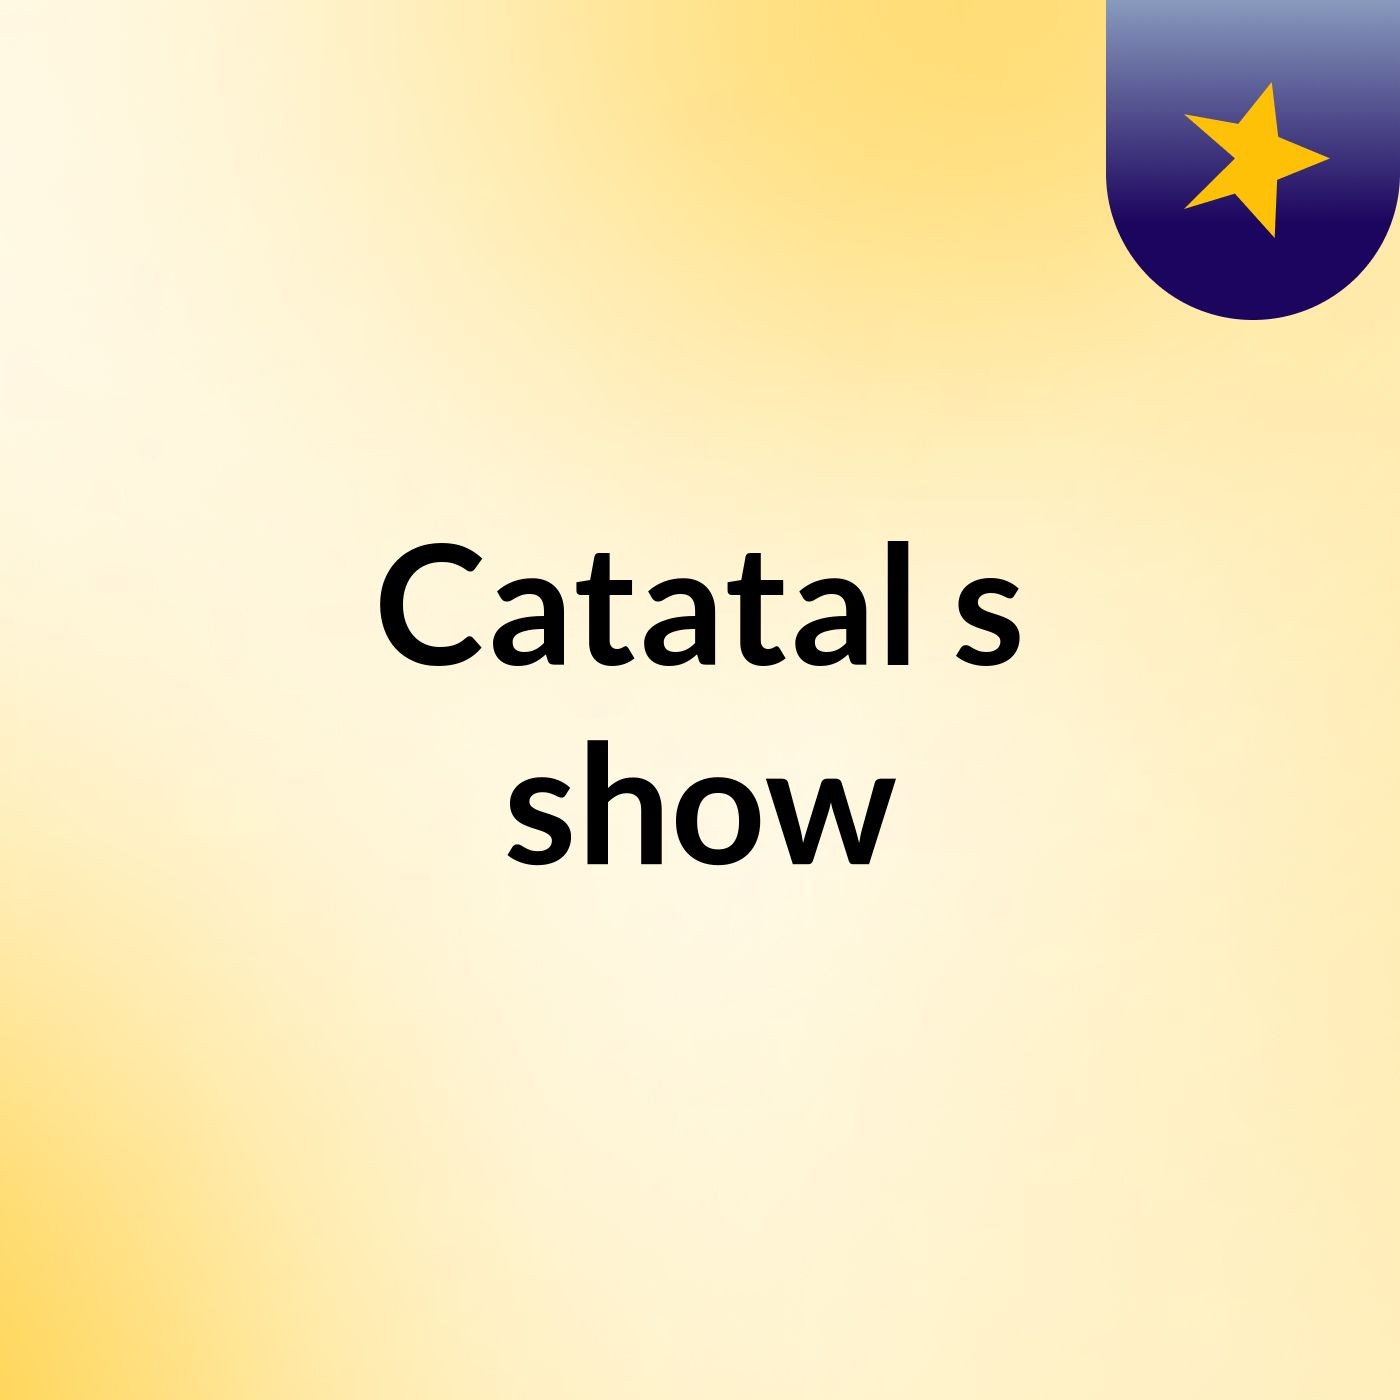 Catatal's show